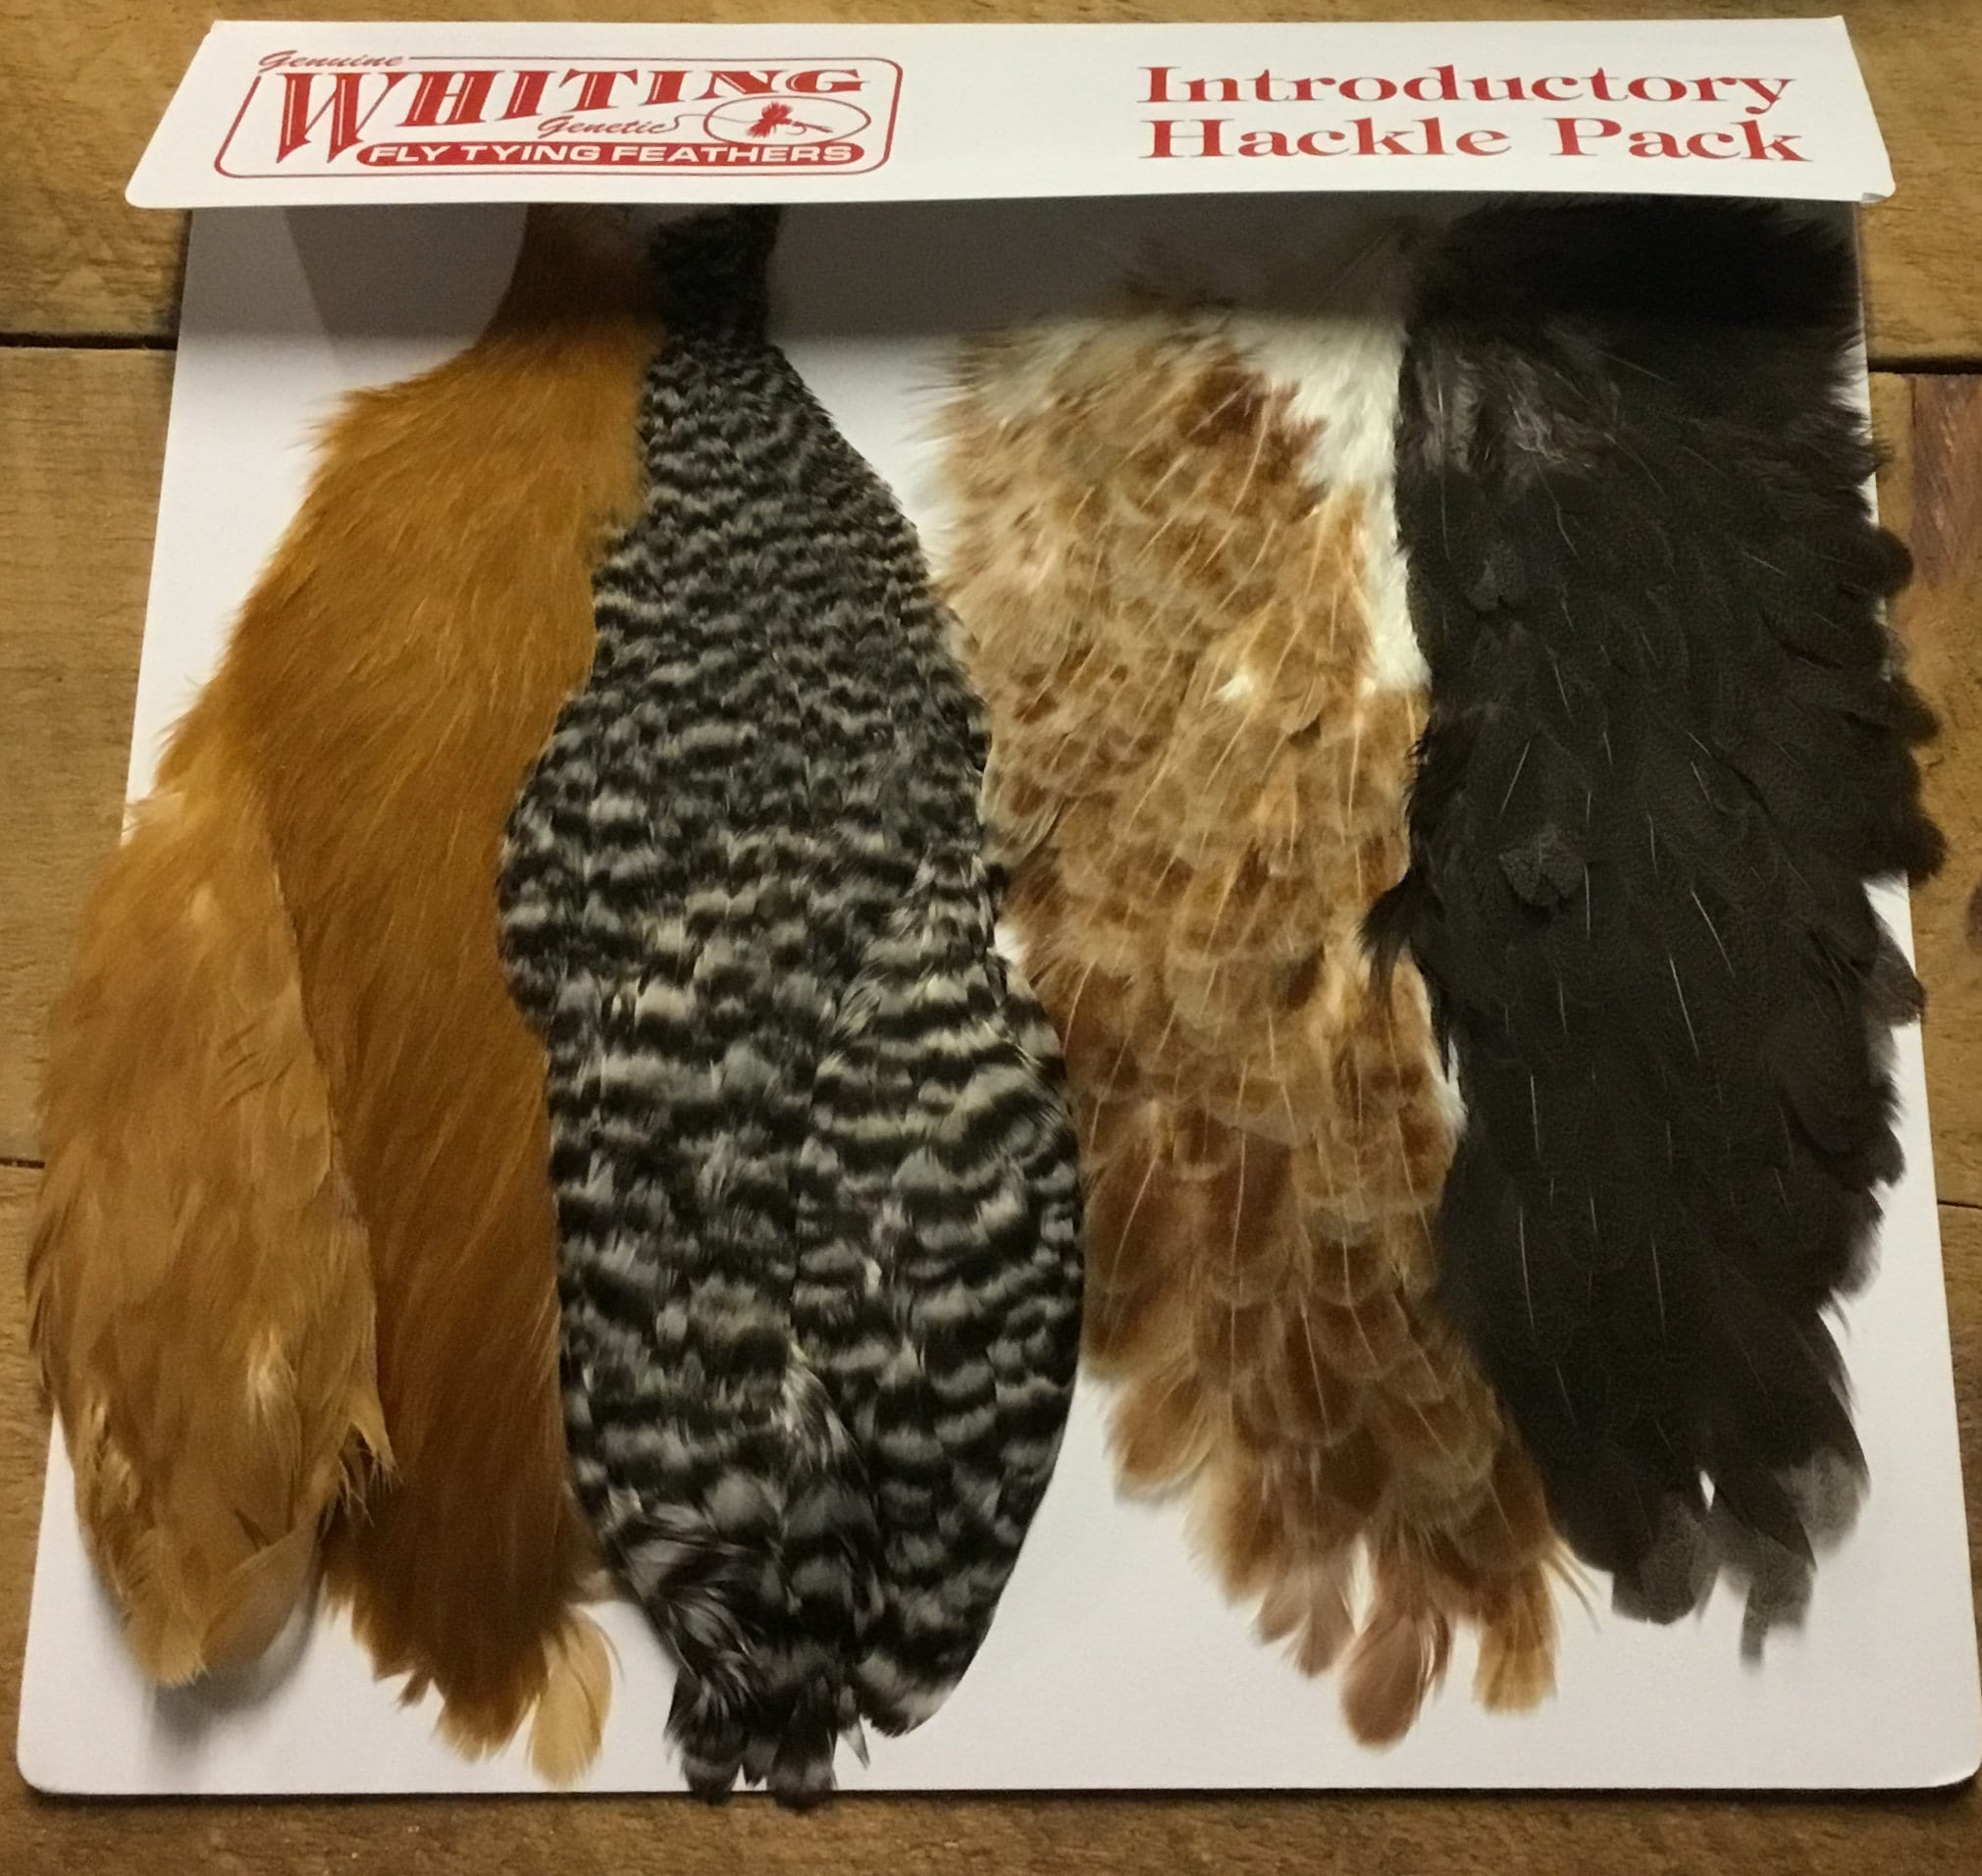 Whiting Soft Hackle Pack 